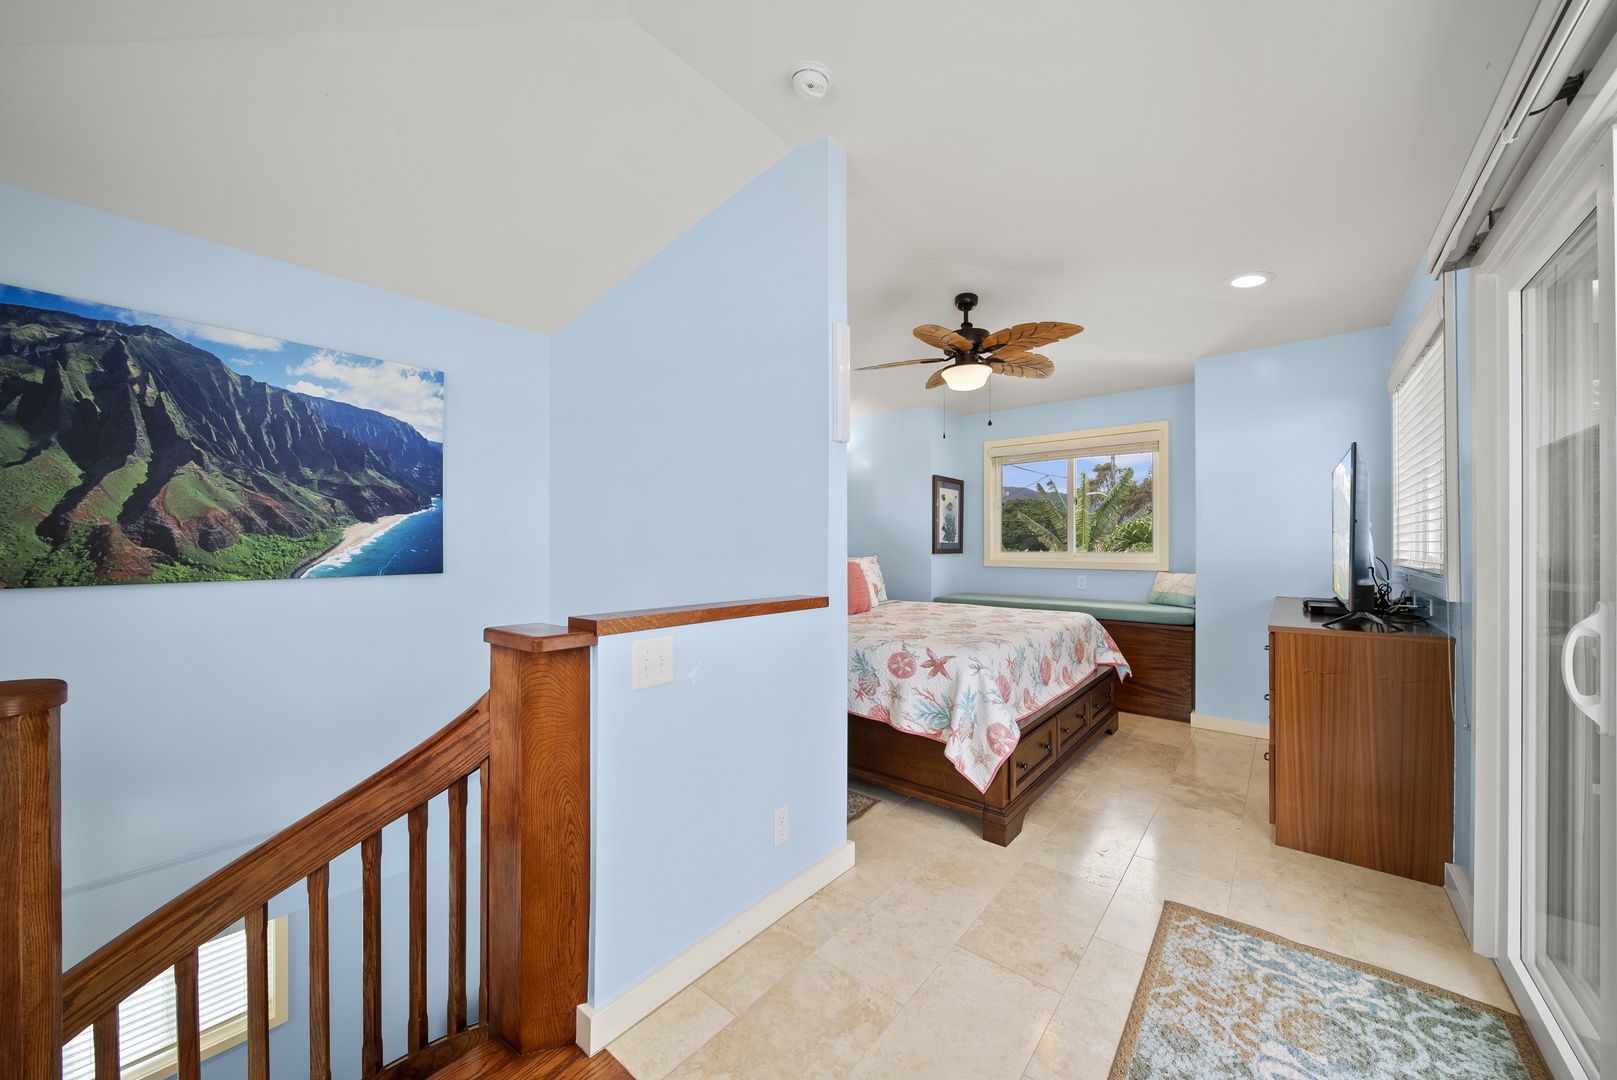 Waialua Vacation Rentals, Kala'iku Cottage - Going up the custom spiral staircase you come to the main bedroom loft